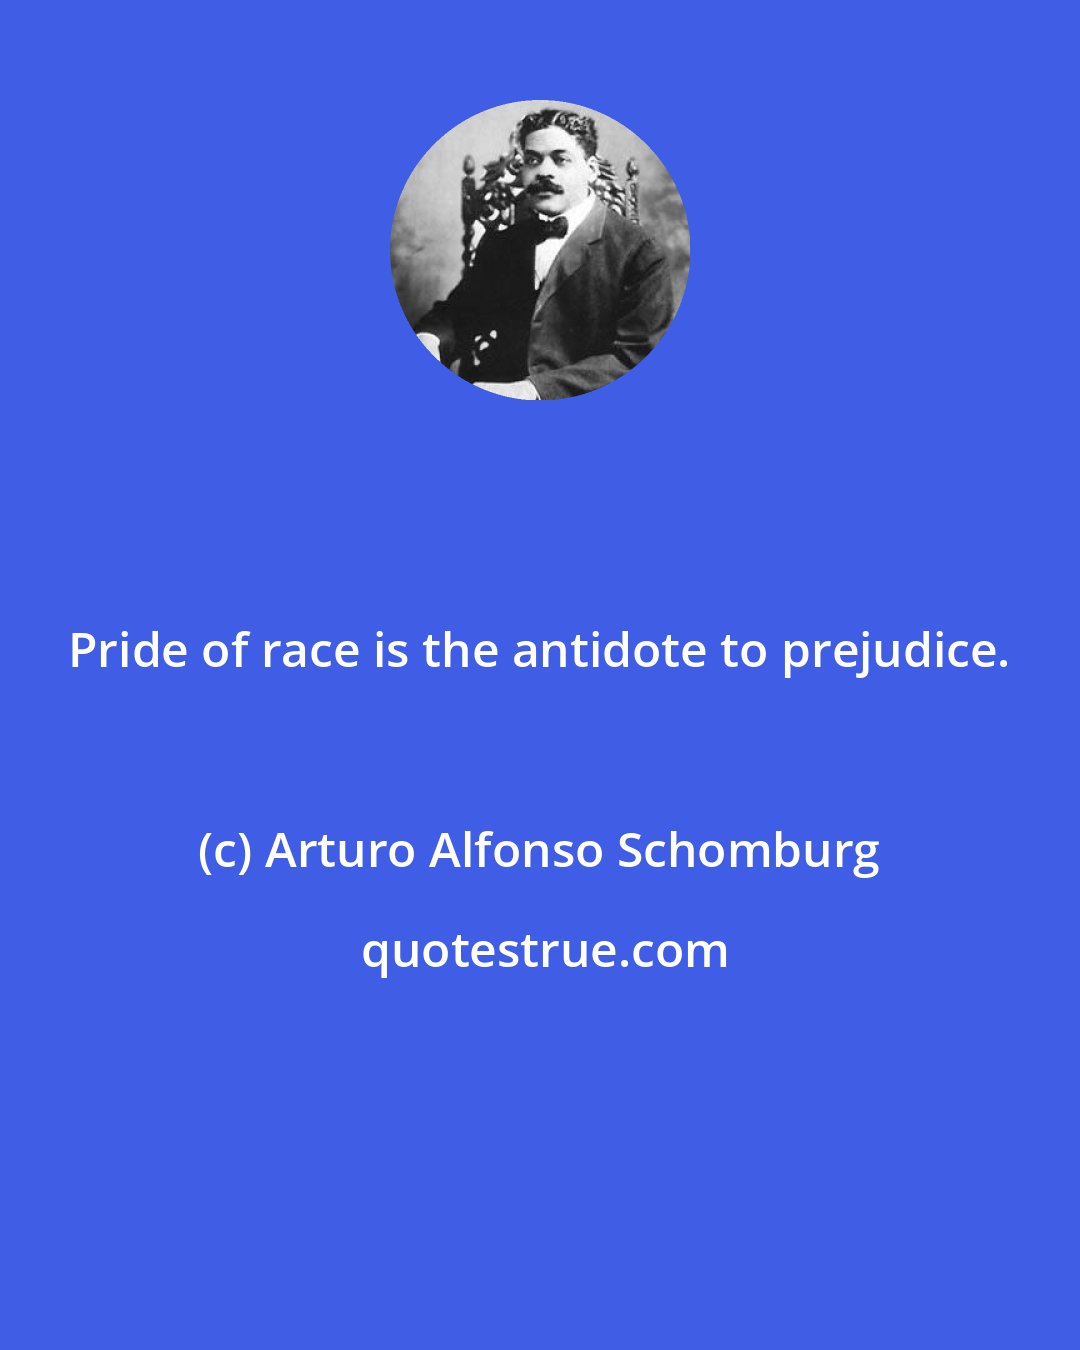 Arturo Alfonso Schomburg: Pride of race is the antidote to prejudice.